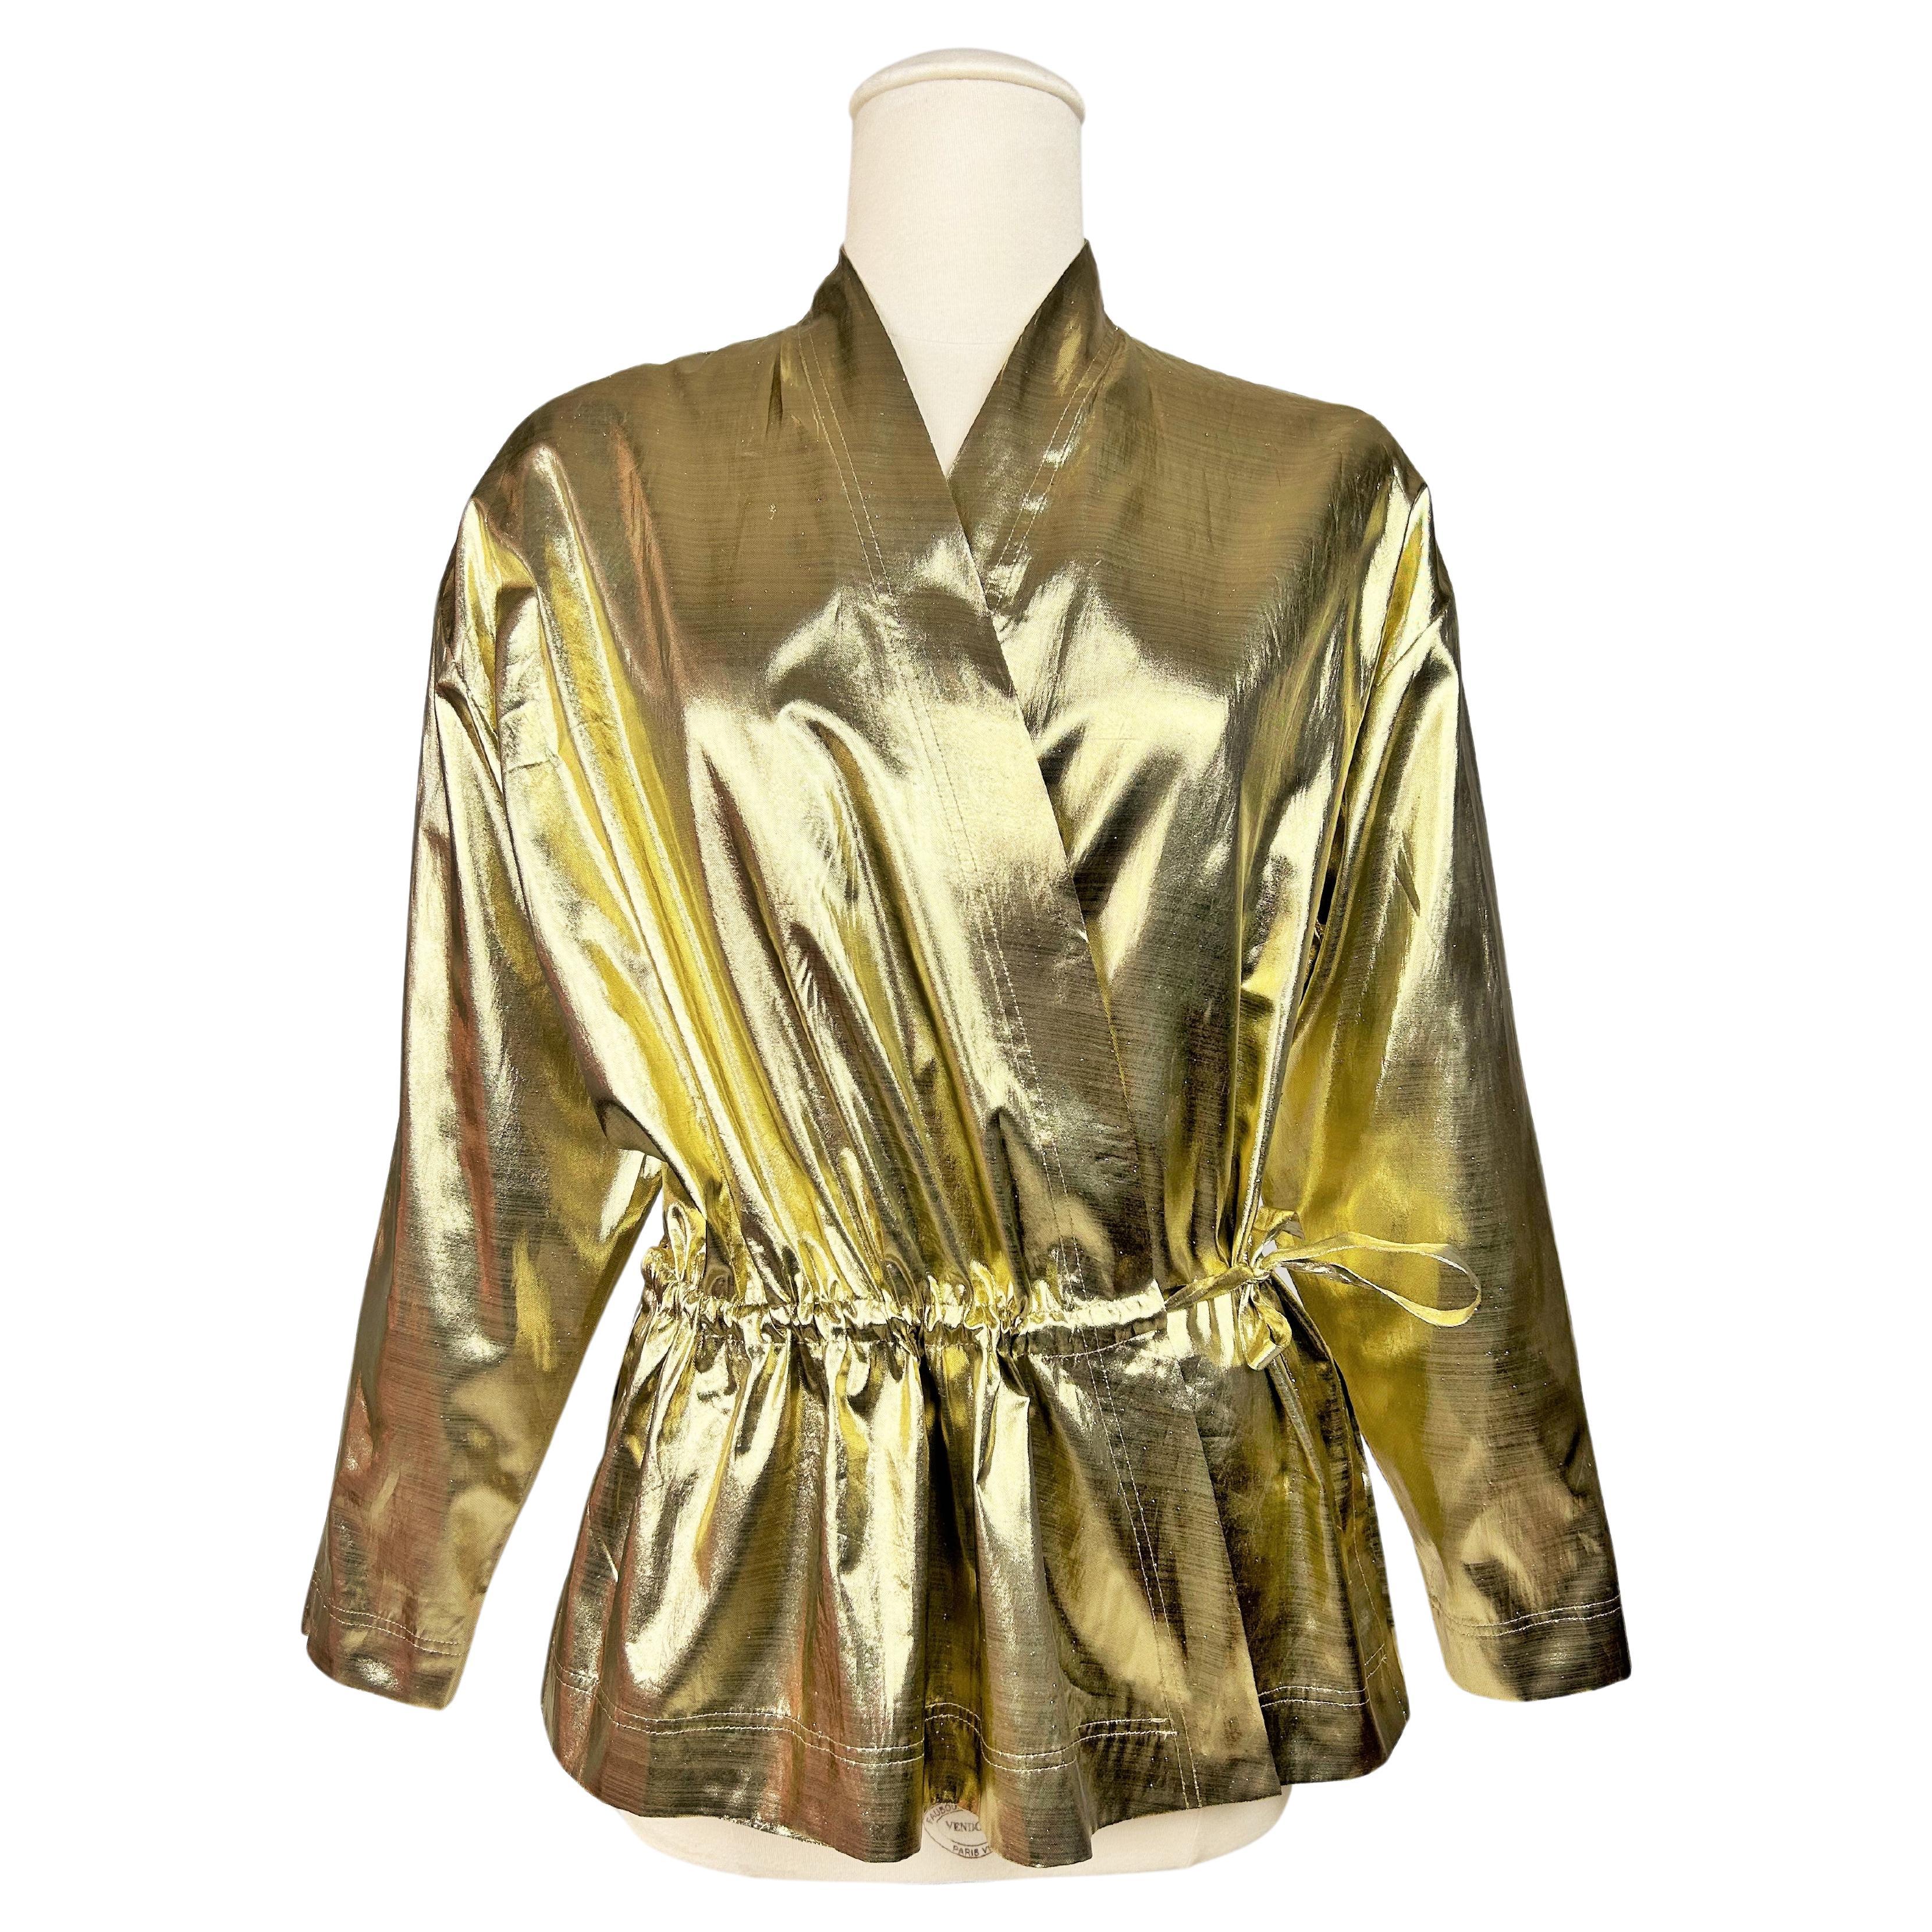 A Loris Azzaro Couture Top in Lurex and Silver Chains - French Circa 1970